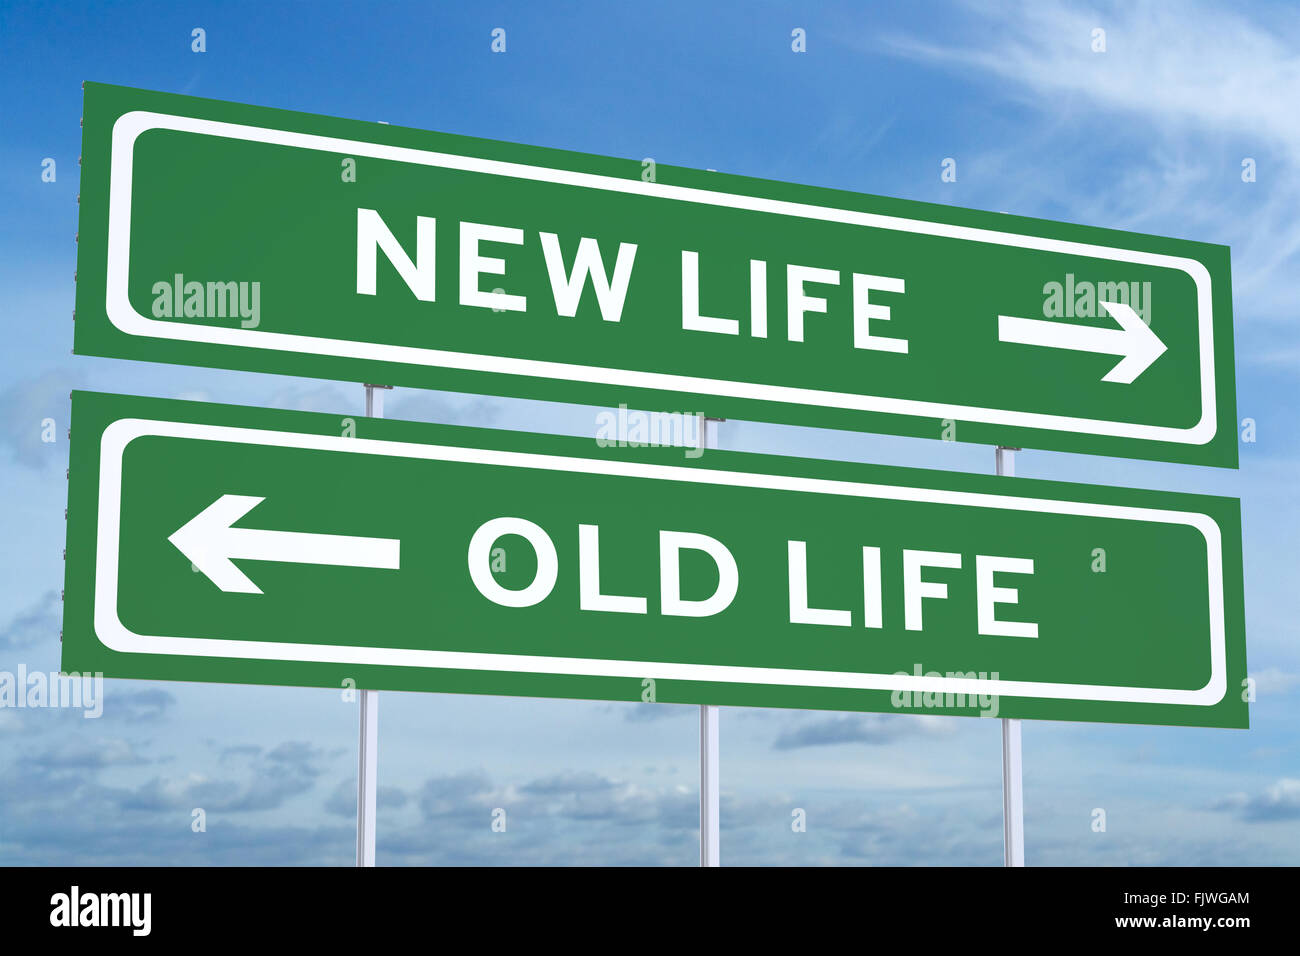 new or old life, Lifestyle choices concept on road billboard Stock Photo